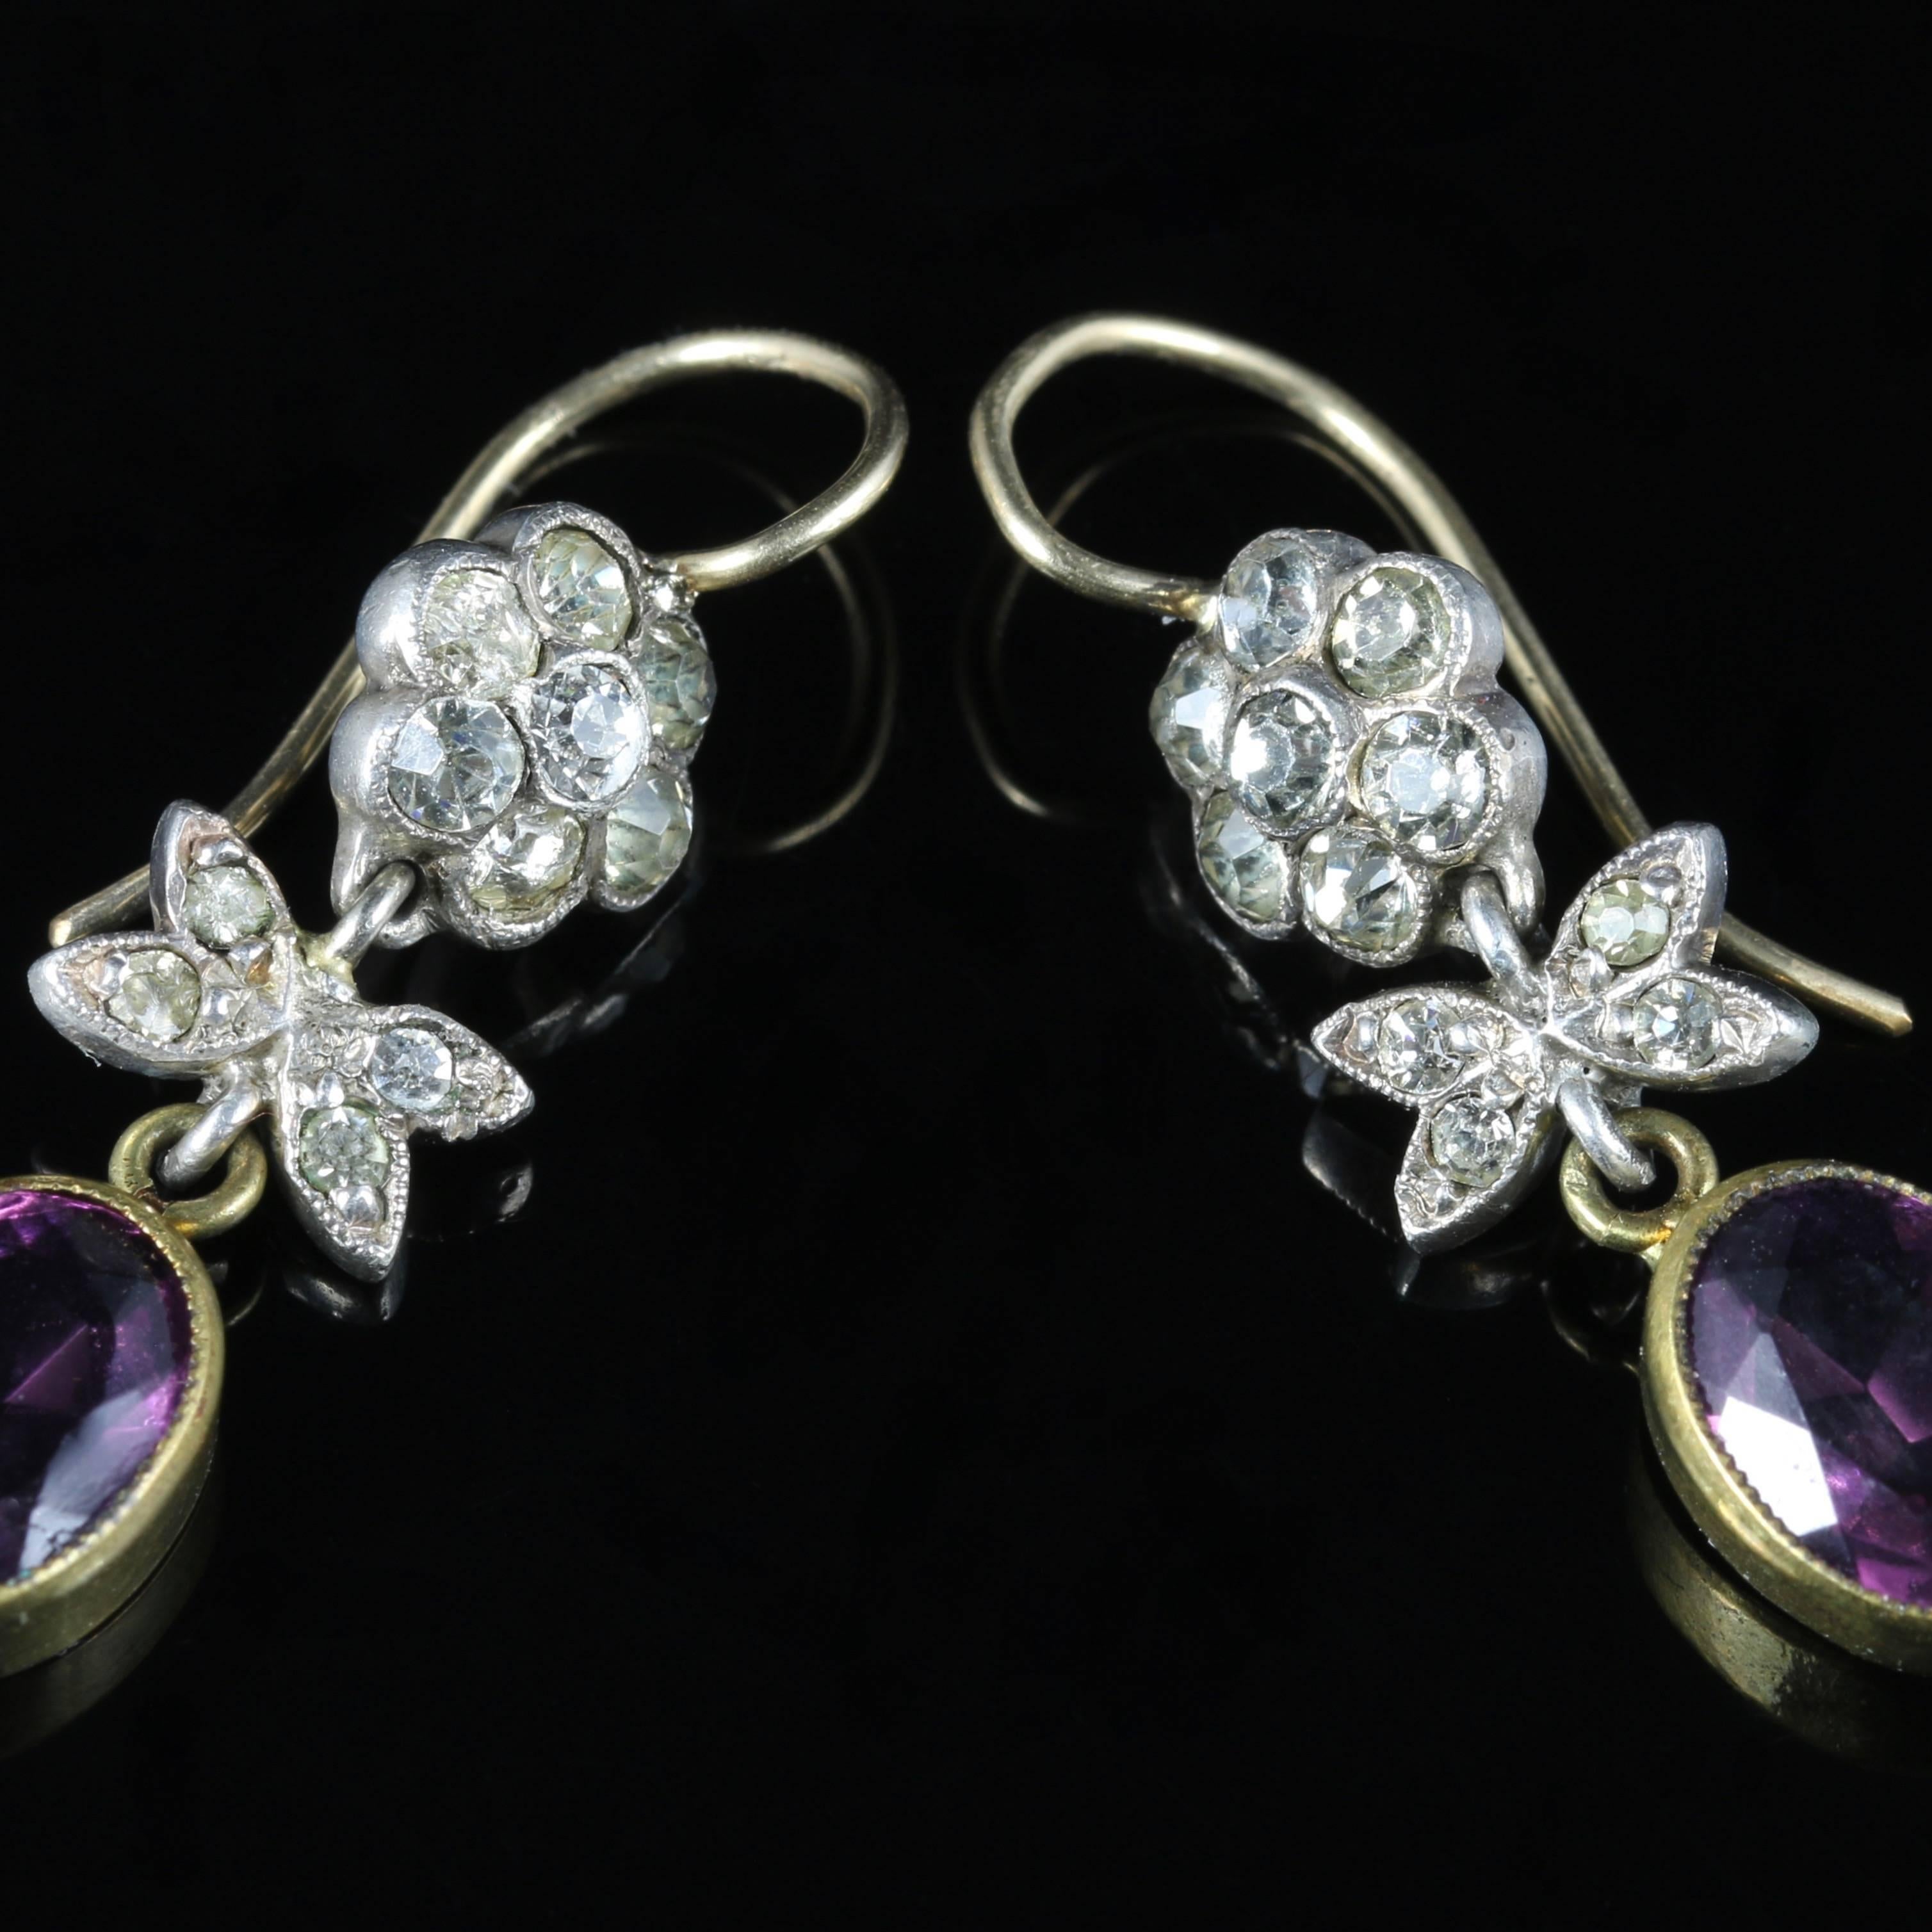 Antique Victorian Amethyst Paste Earrings Gold Silver In Excellent Condition For Sale In Lancaster, Lancashire